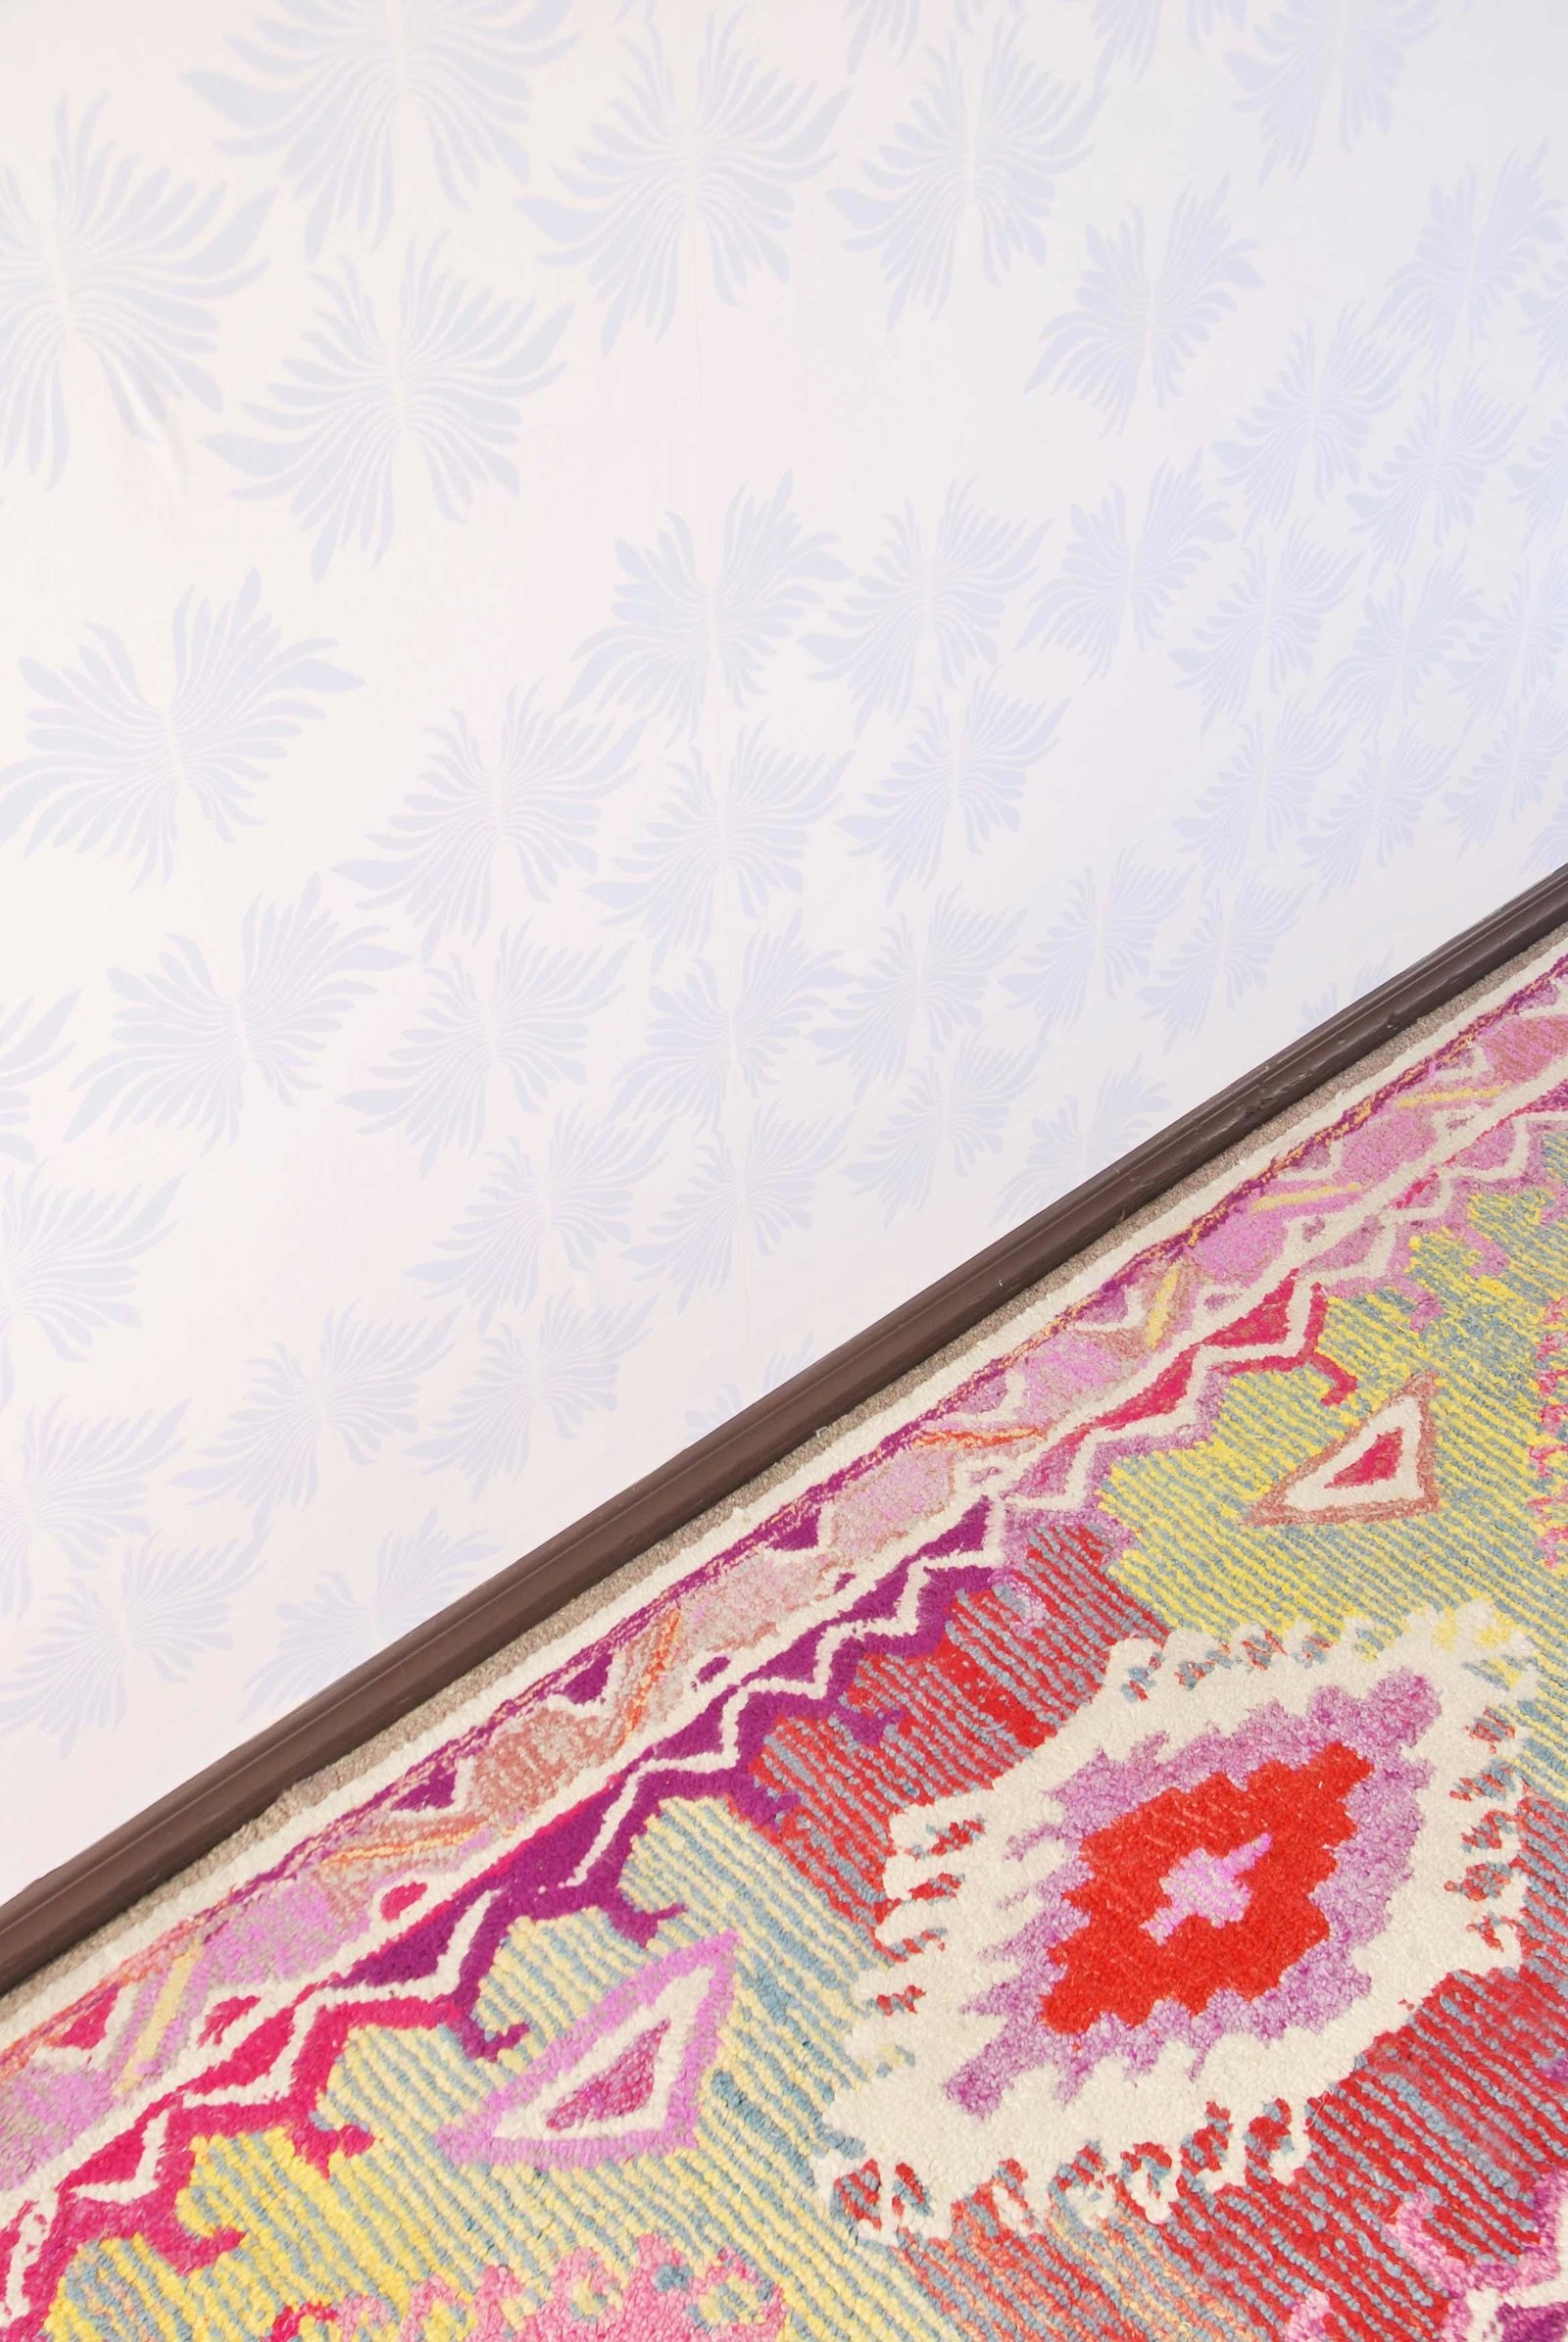 A colorful patterned rug next to an abstract wall papered wall.